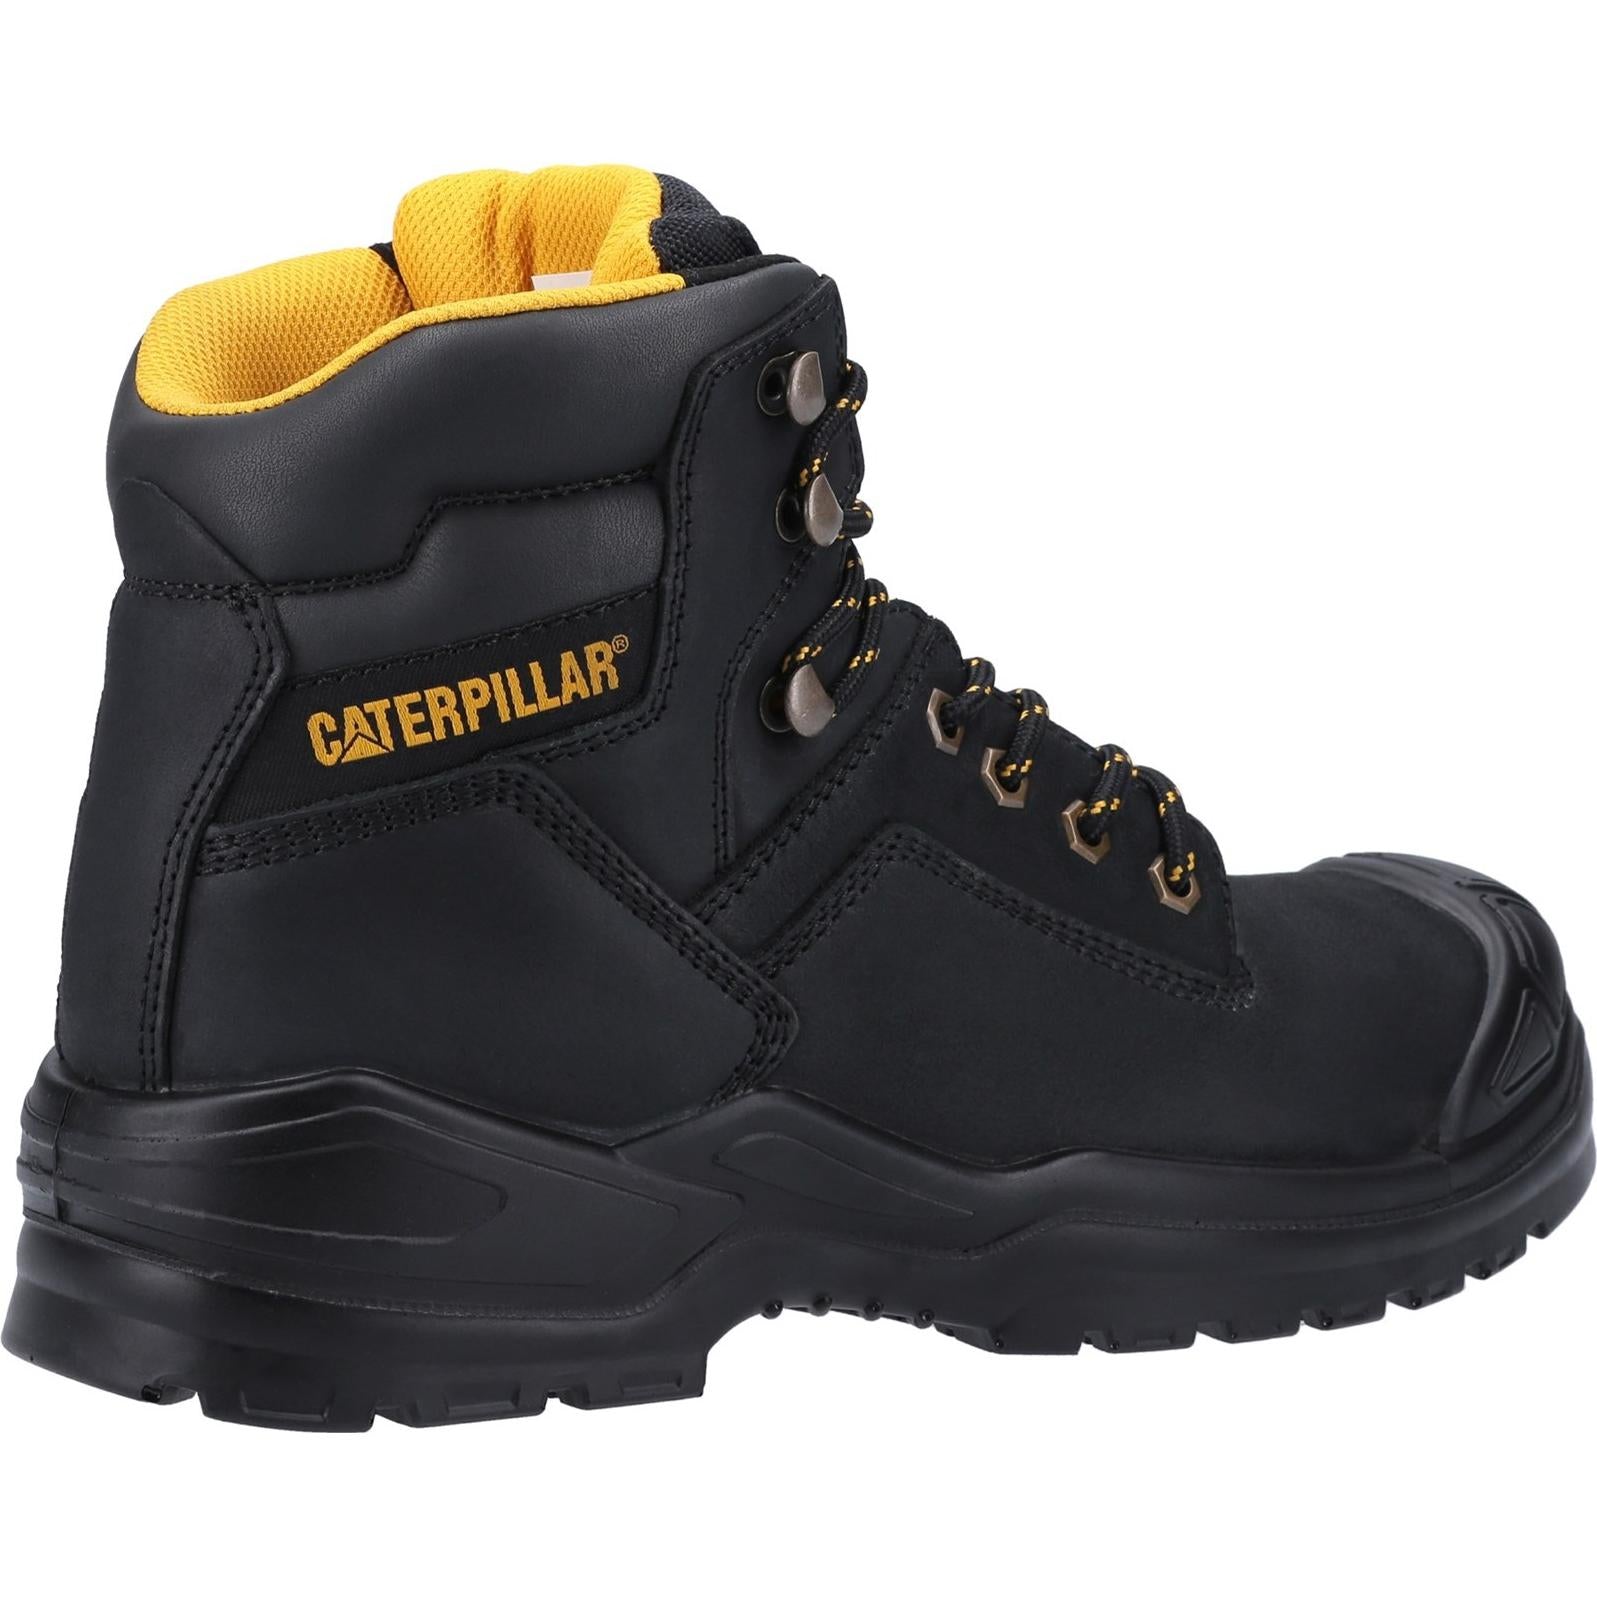 Cat Striver Mid S3 Safety Boot